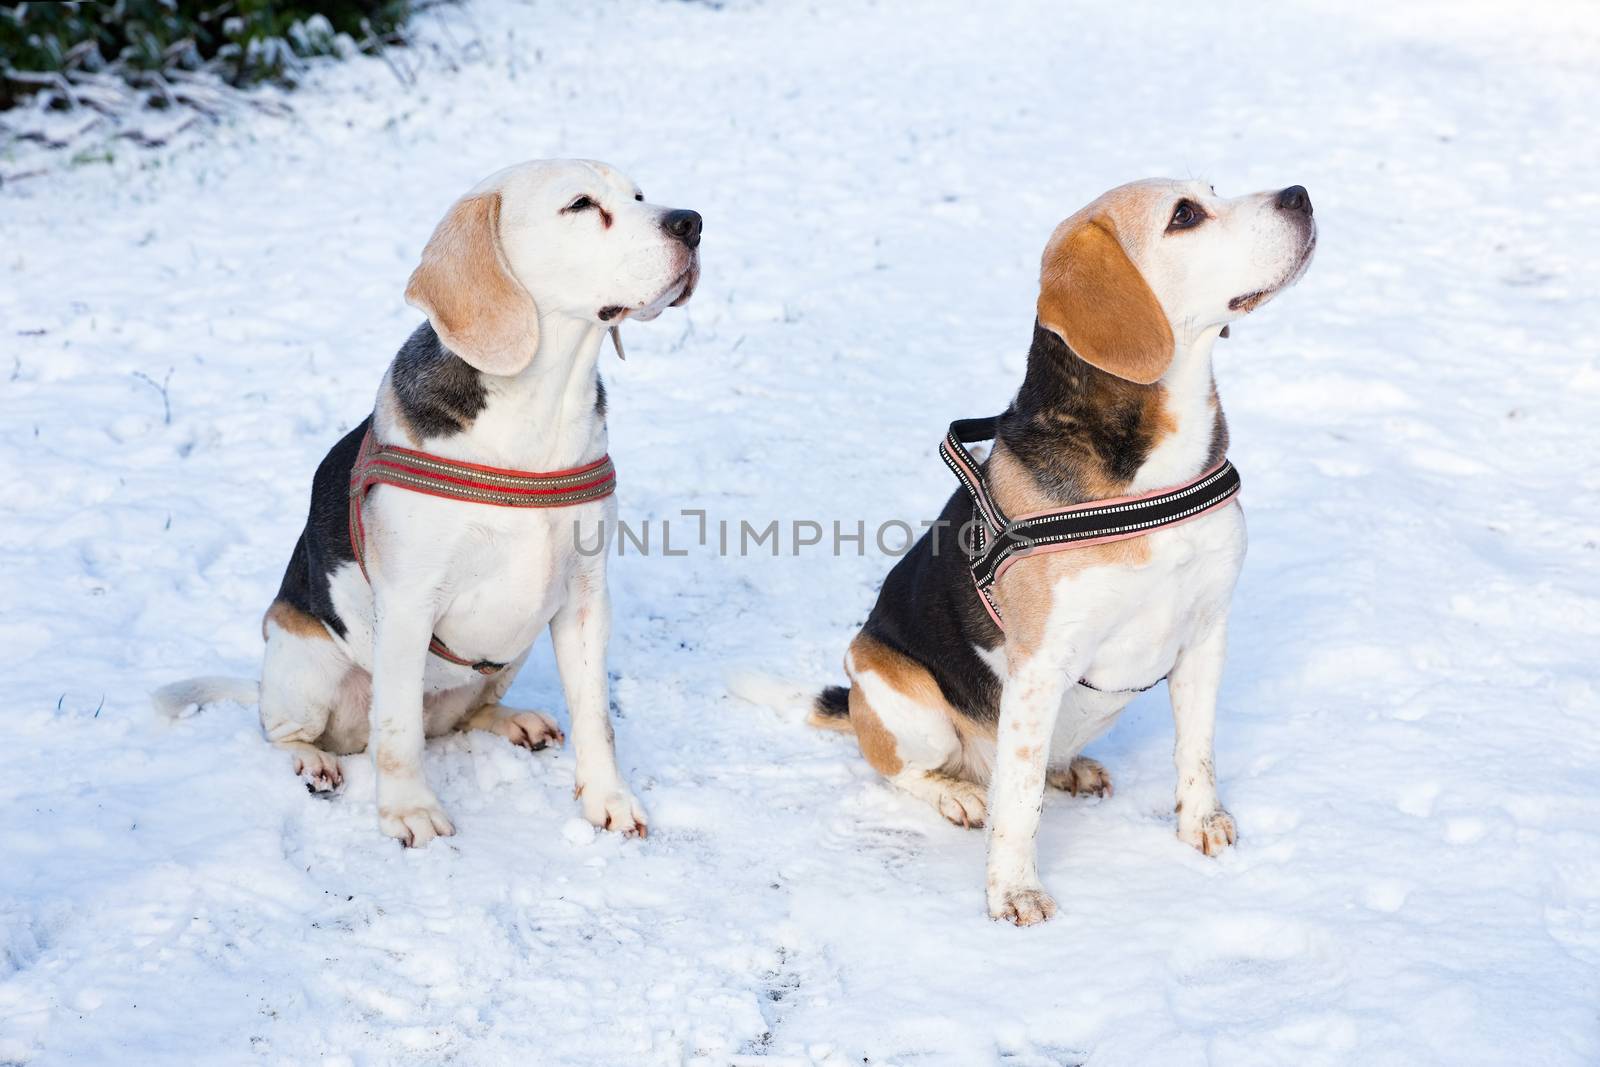 Two hunting dogs sitting together in snow by BenSchonewille